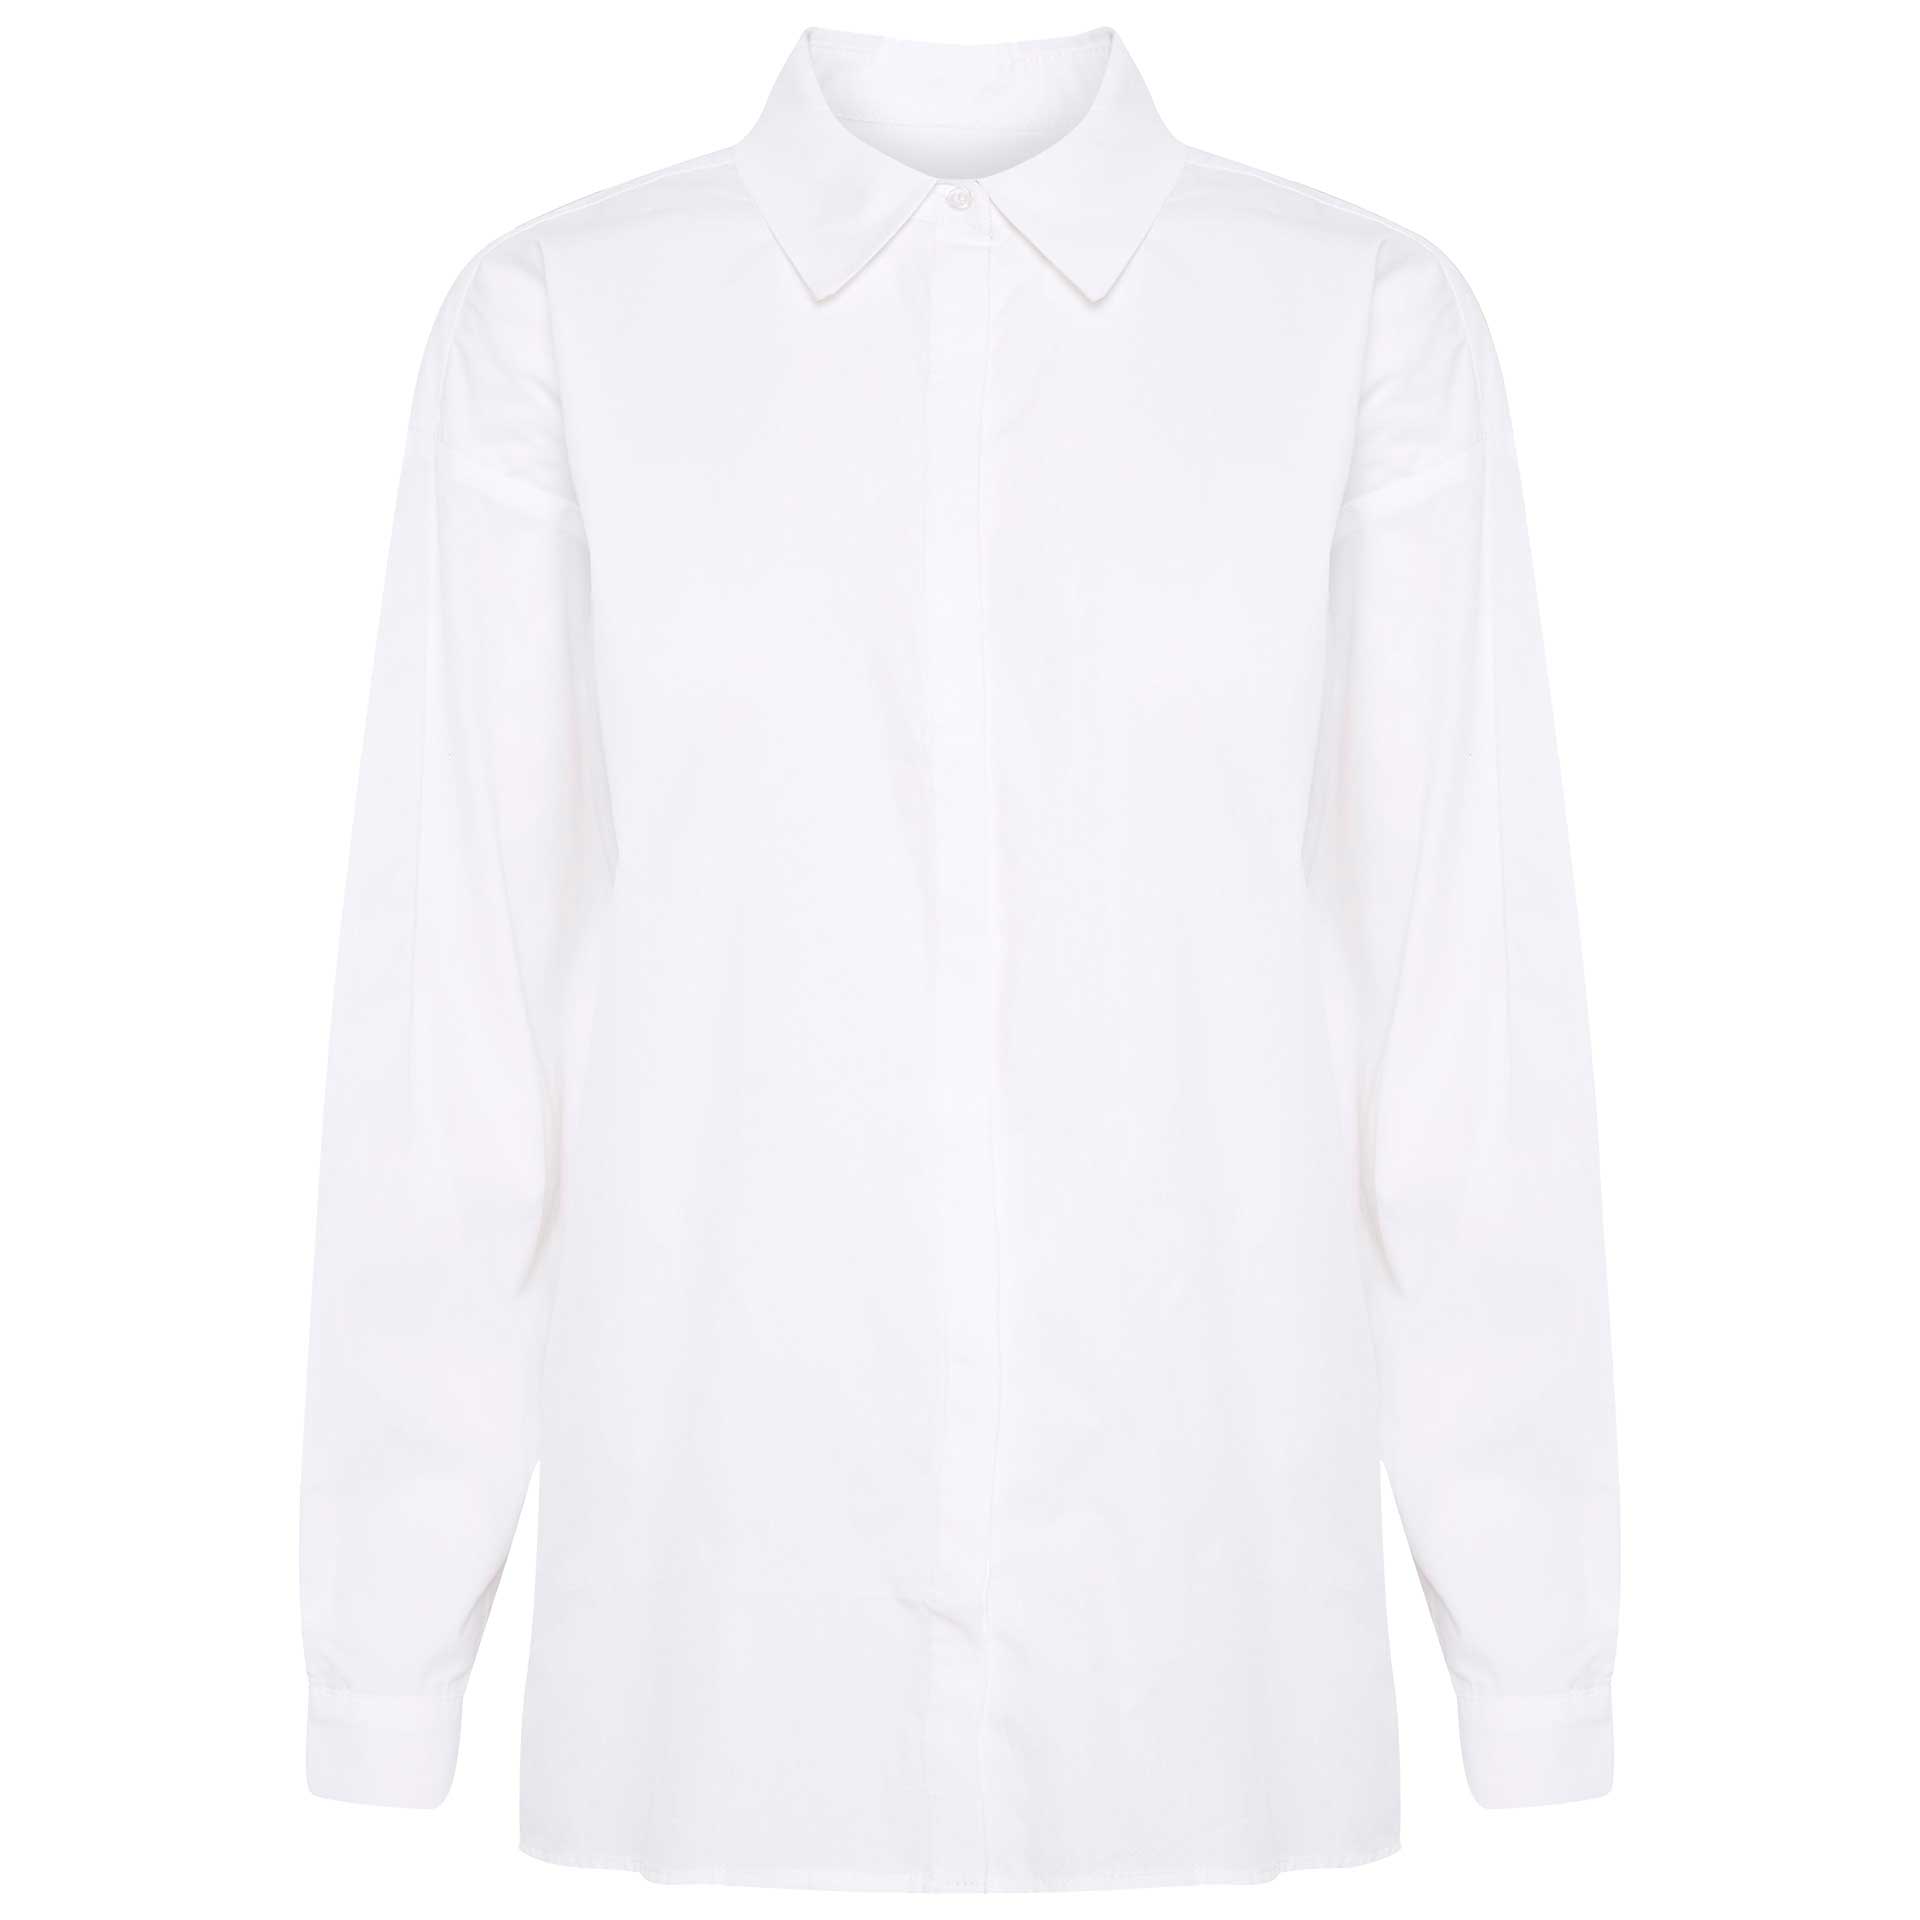 My Essential Wardrobe Blouse The Shirt 1